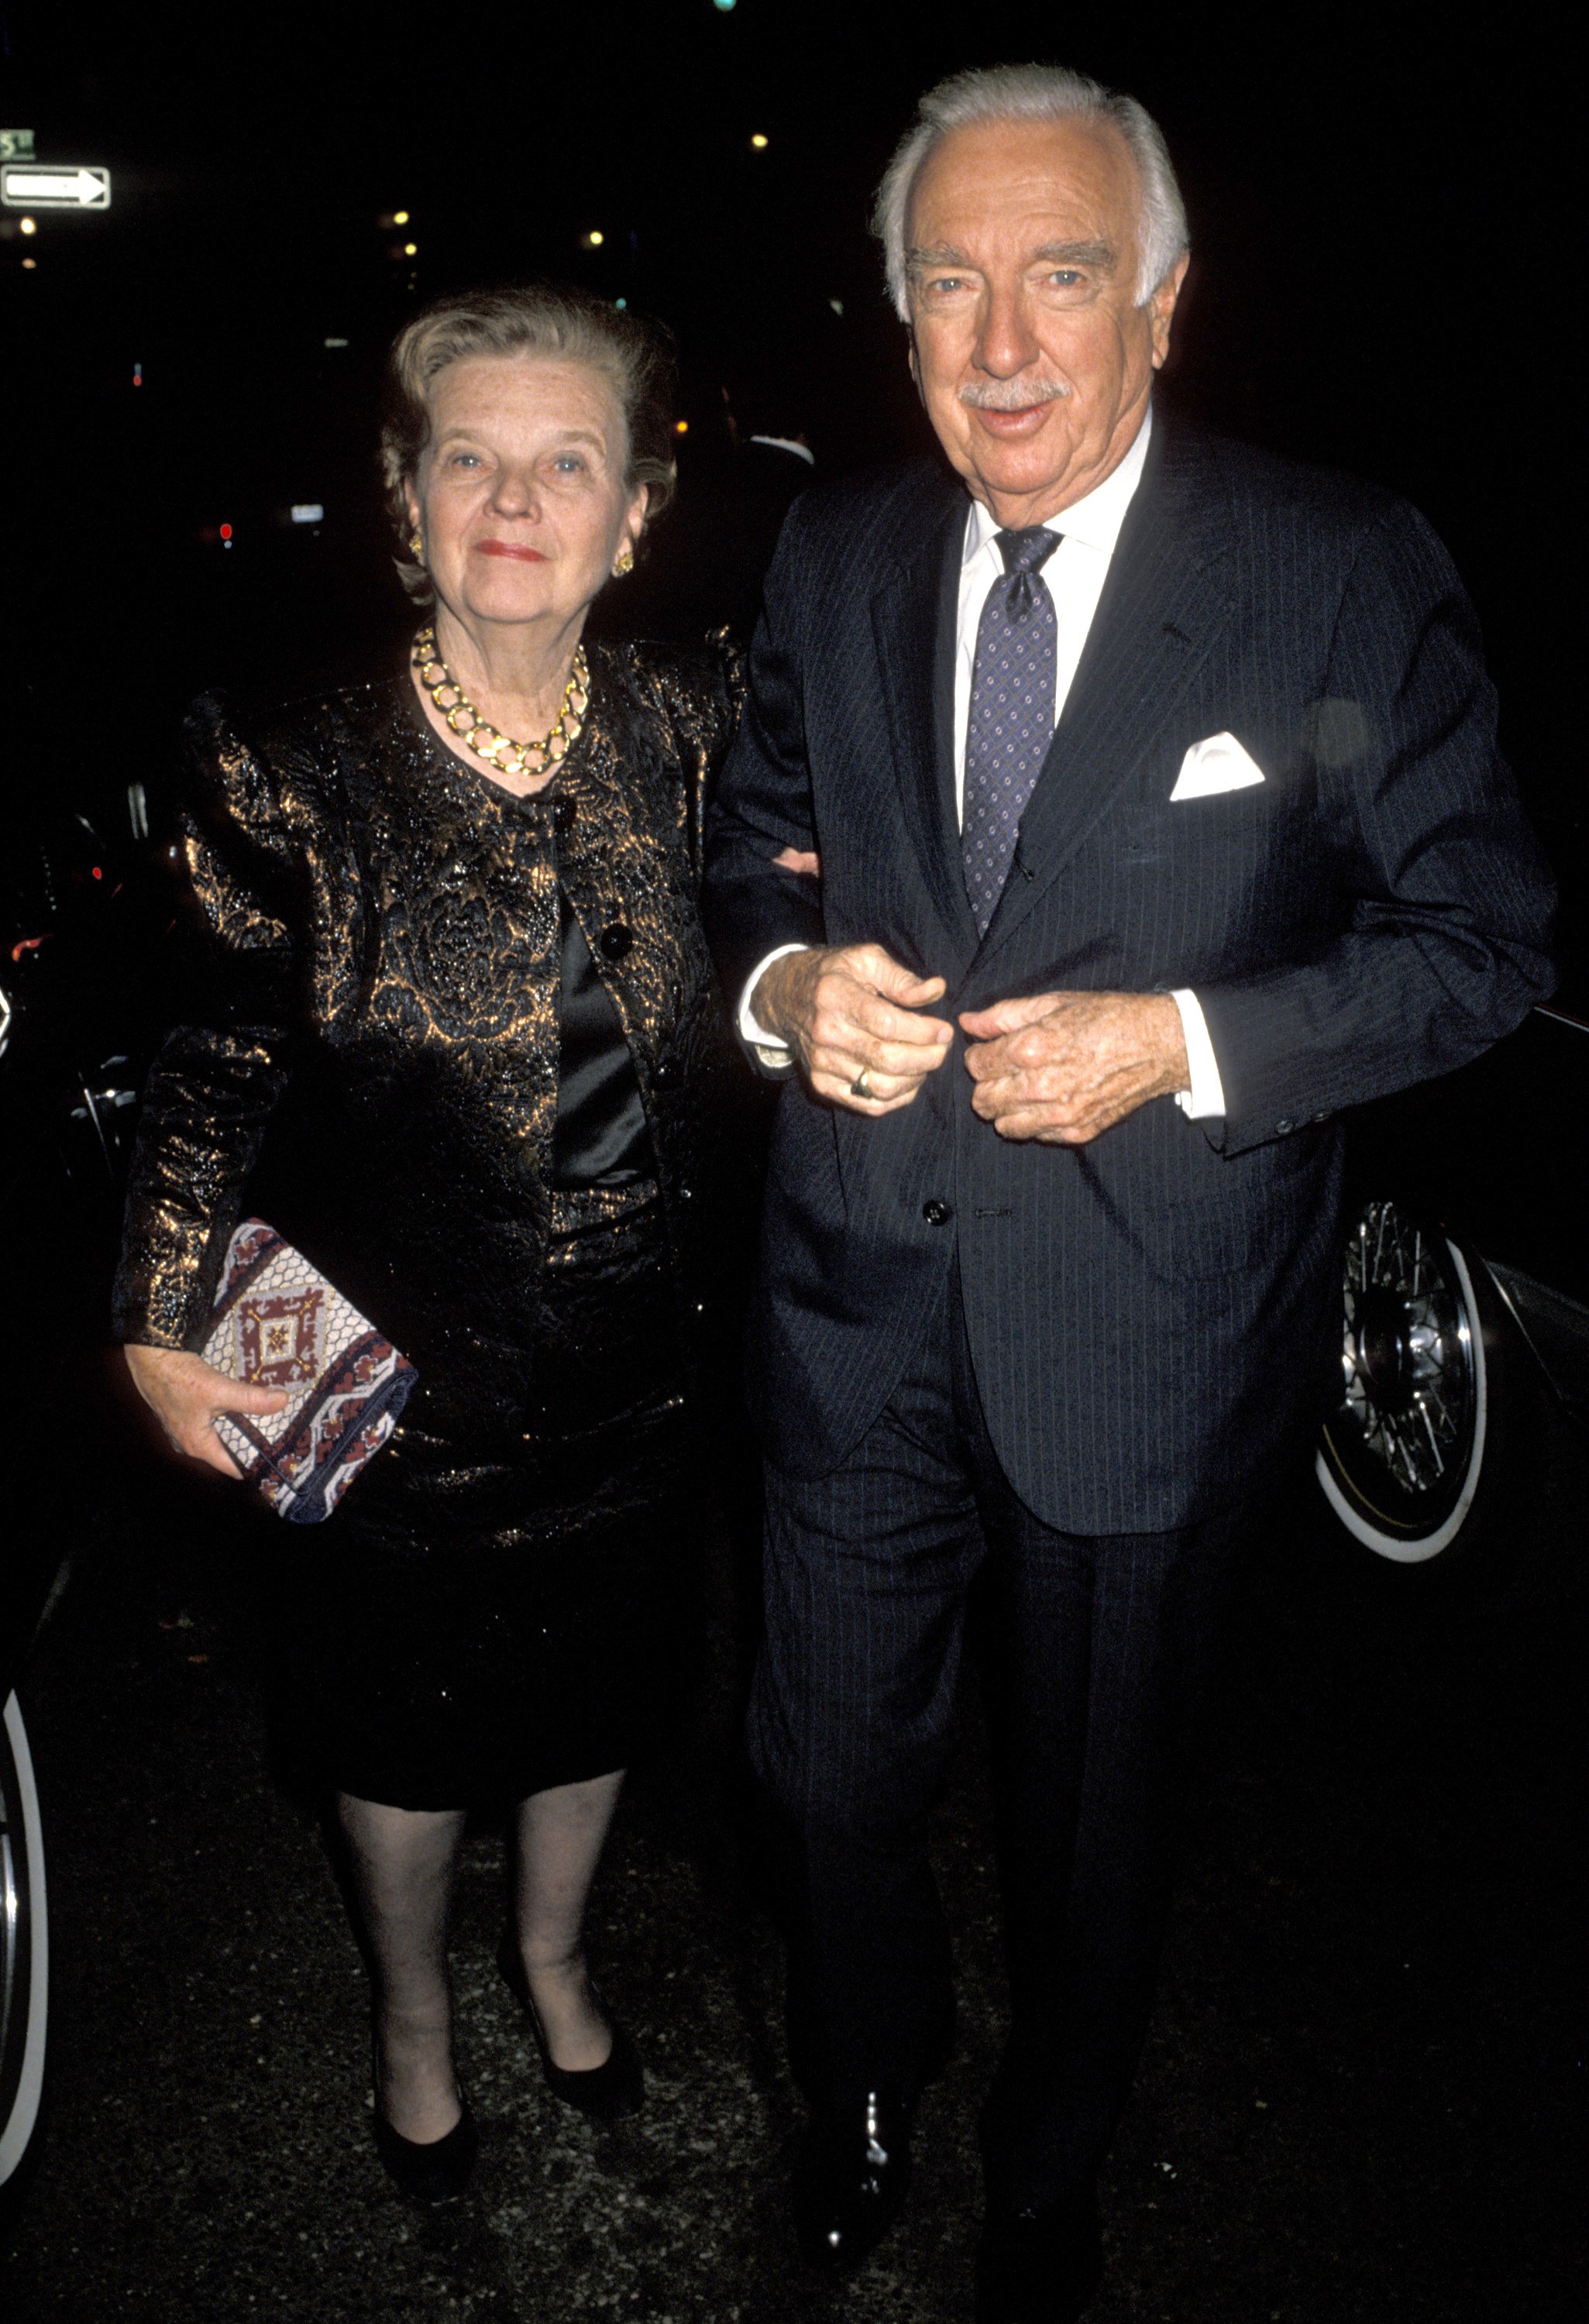 Walter Cronkite and wife Betsy during Ellis Dinner Party at Mortimer's restaurant in New York City, New York | Photo: Getty Images